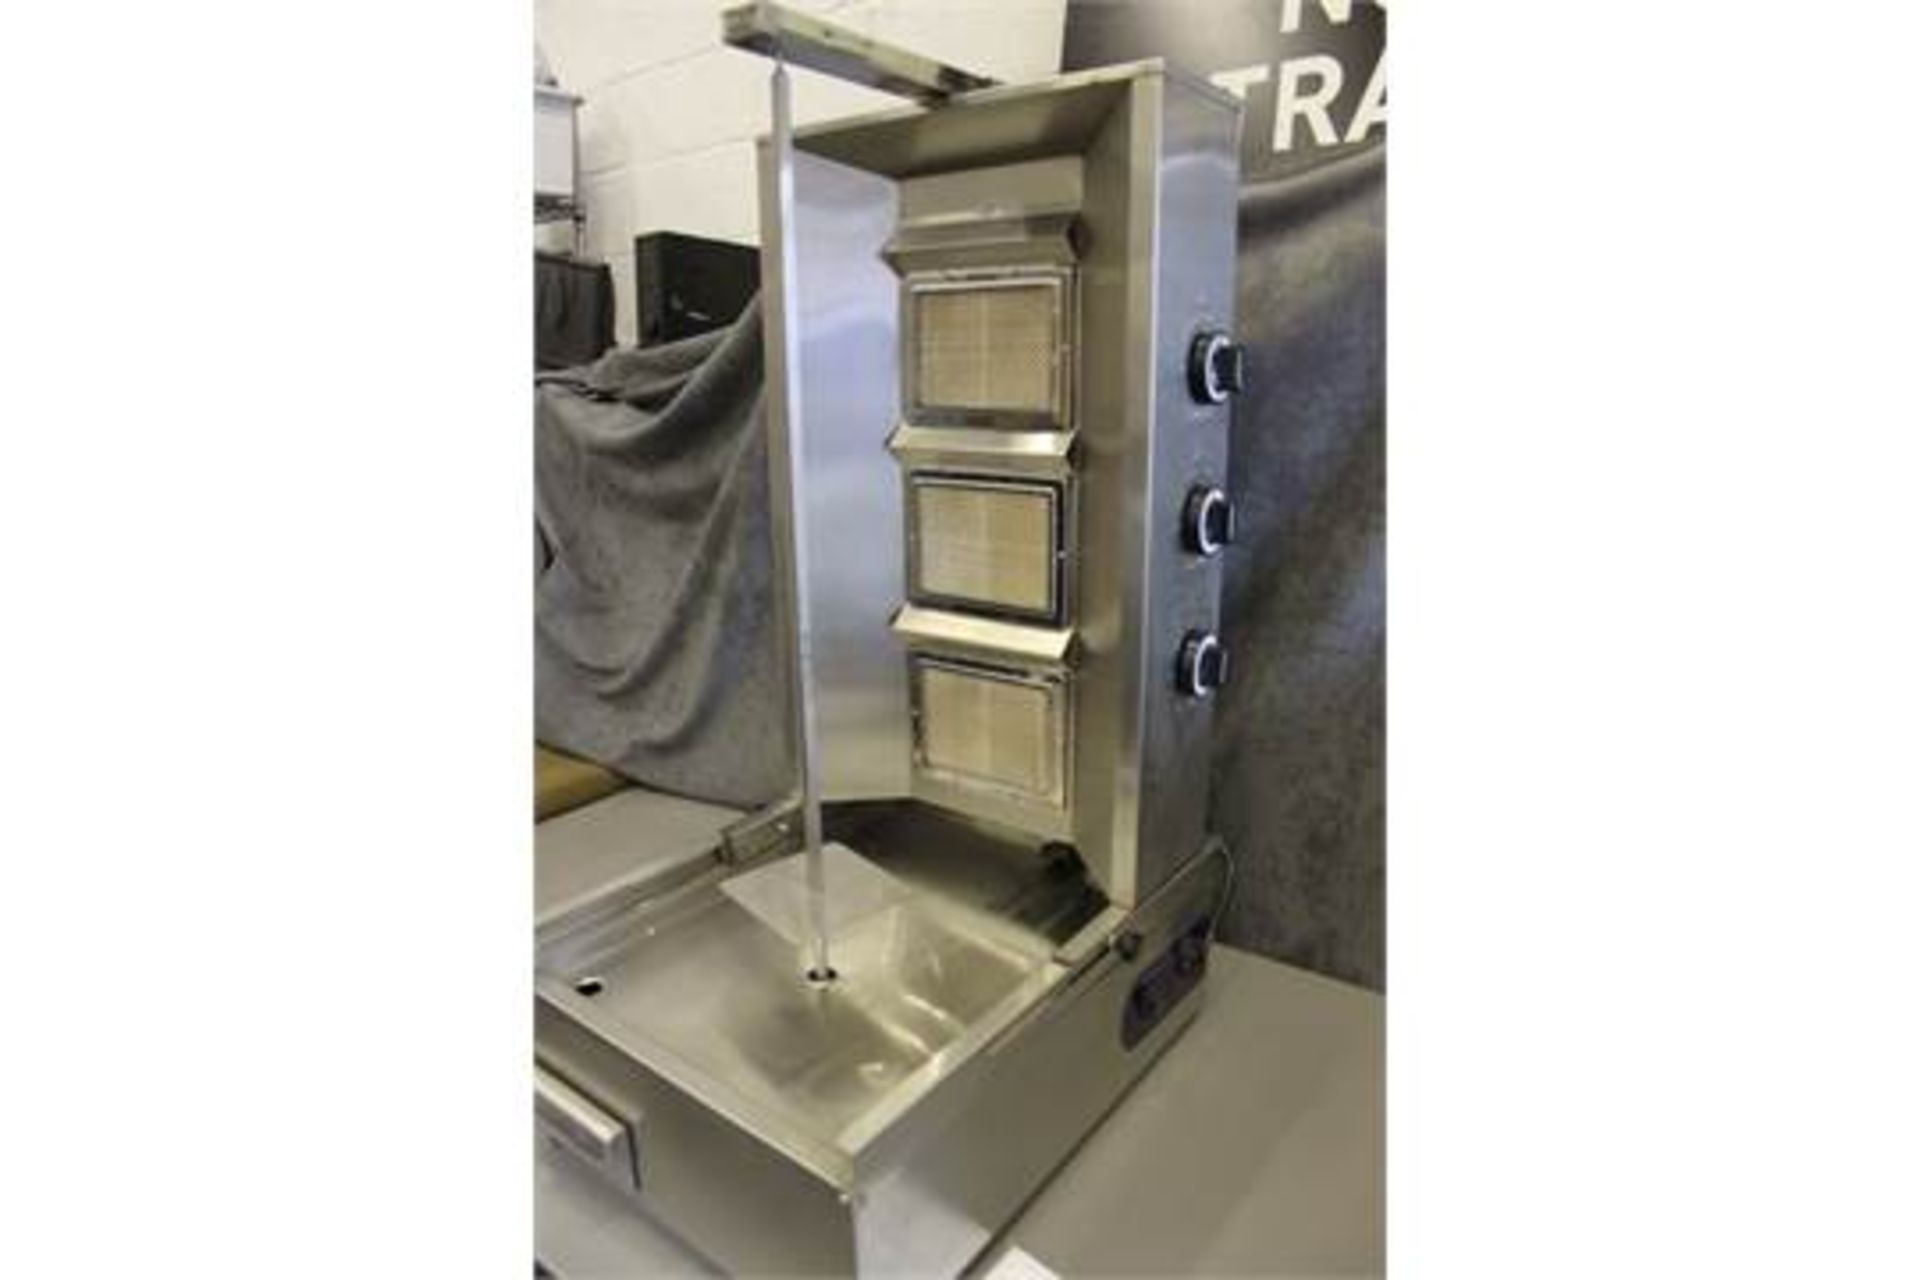 Heavy Duty LPG Gas Gyros or Kebab Grill is ideal for all types of doner kebabs and has the